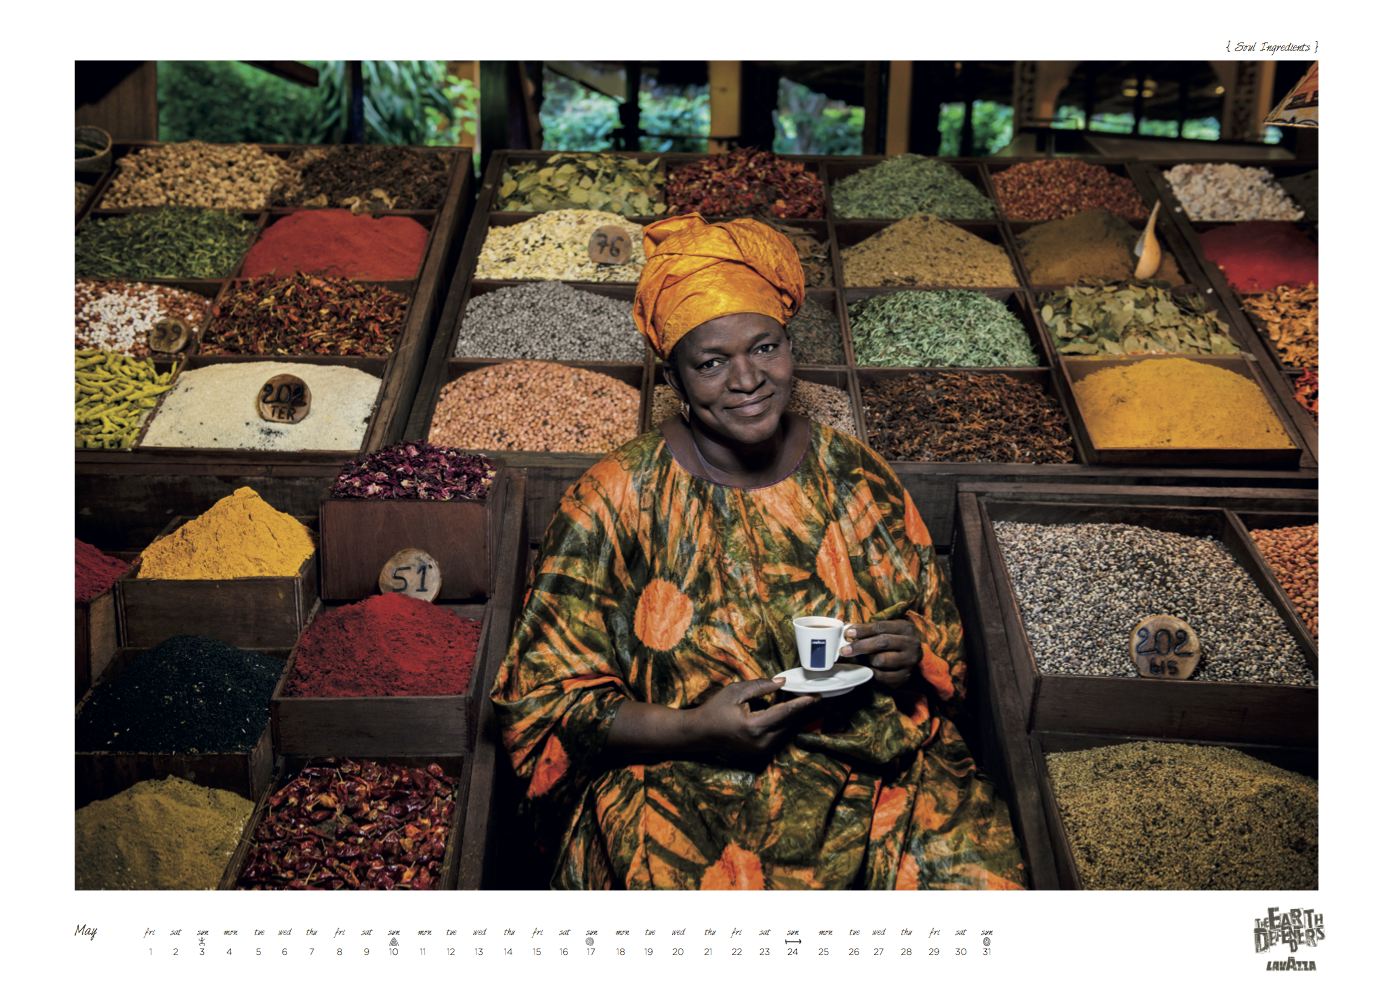 THE EARTH DEFENDERS – THE 2015 LAVAZZA CALENDAR BY STEVE McCURRY